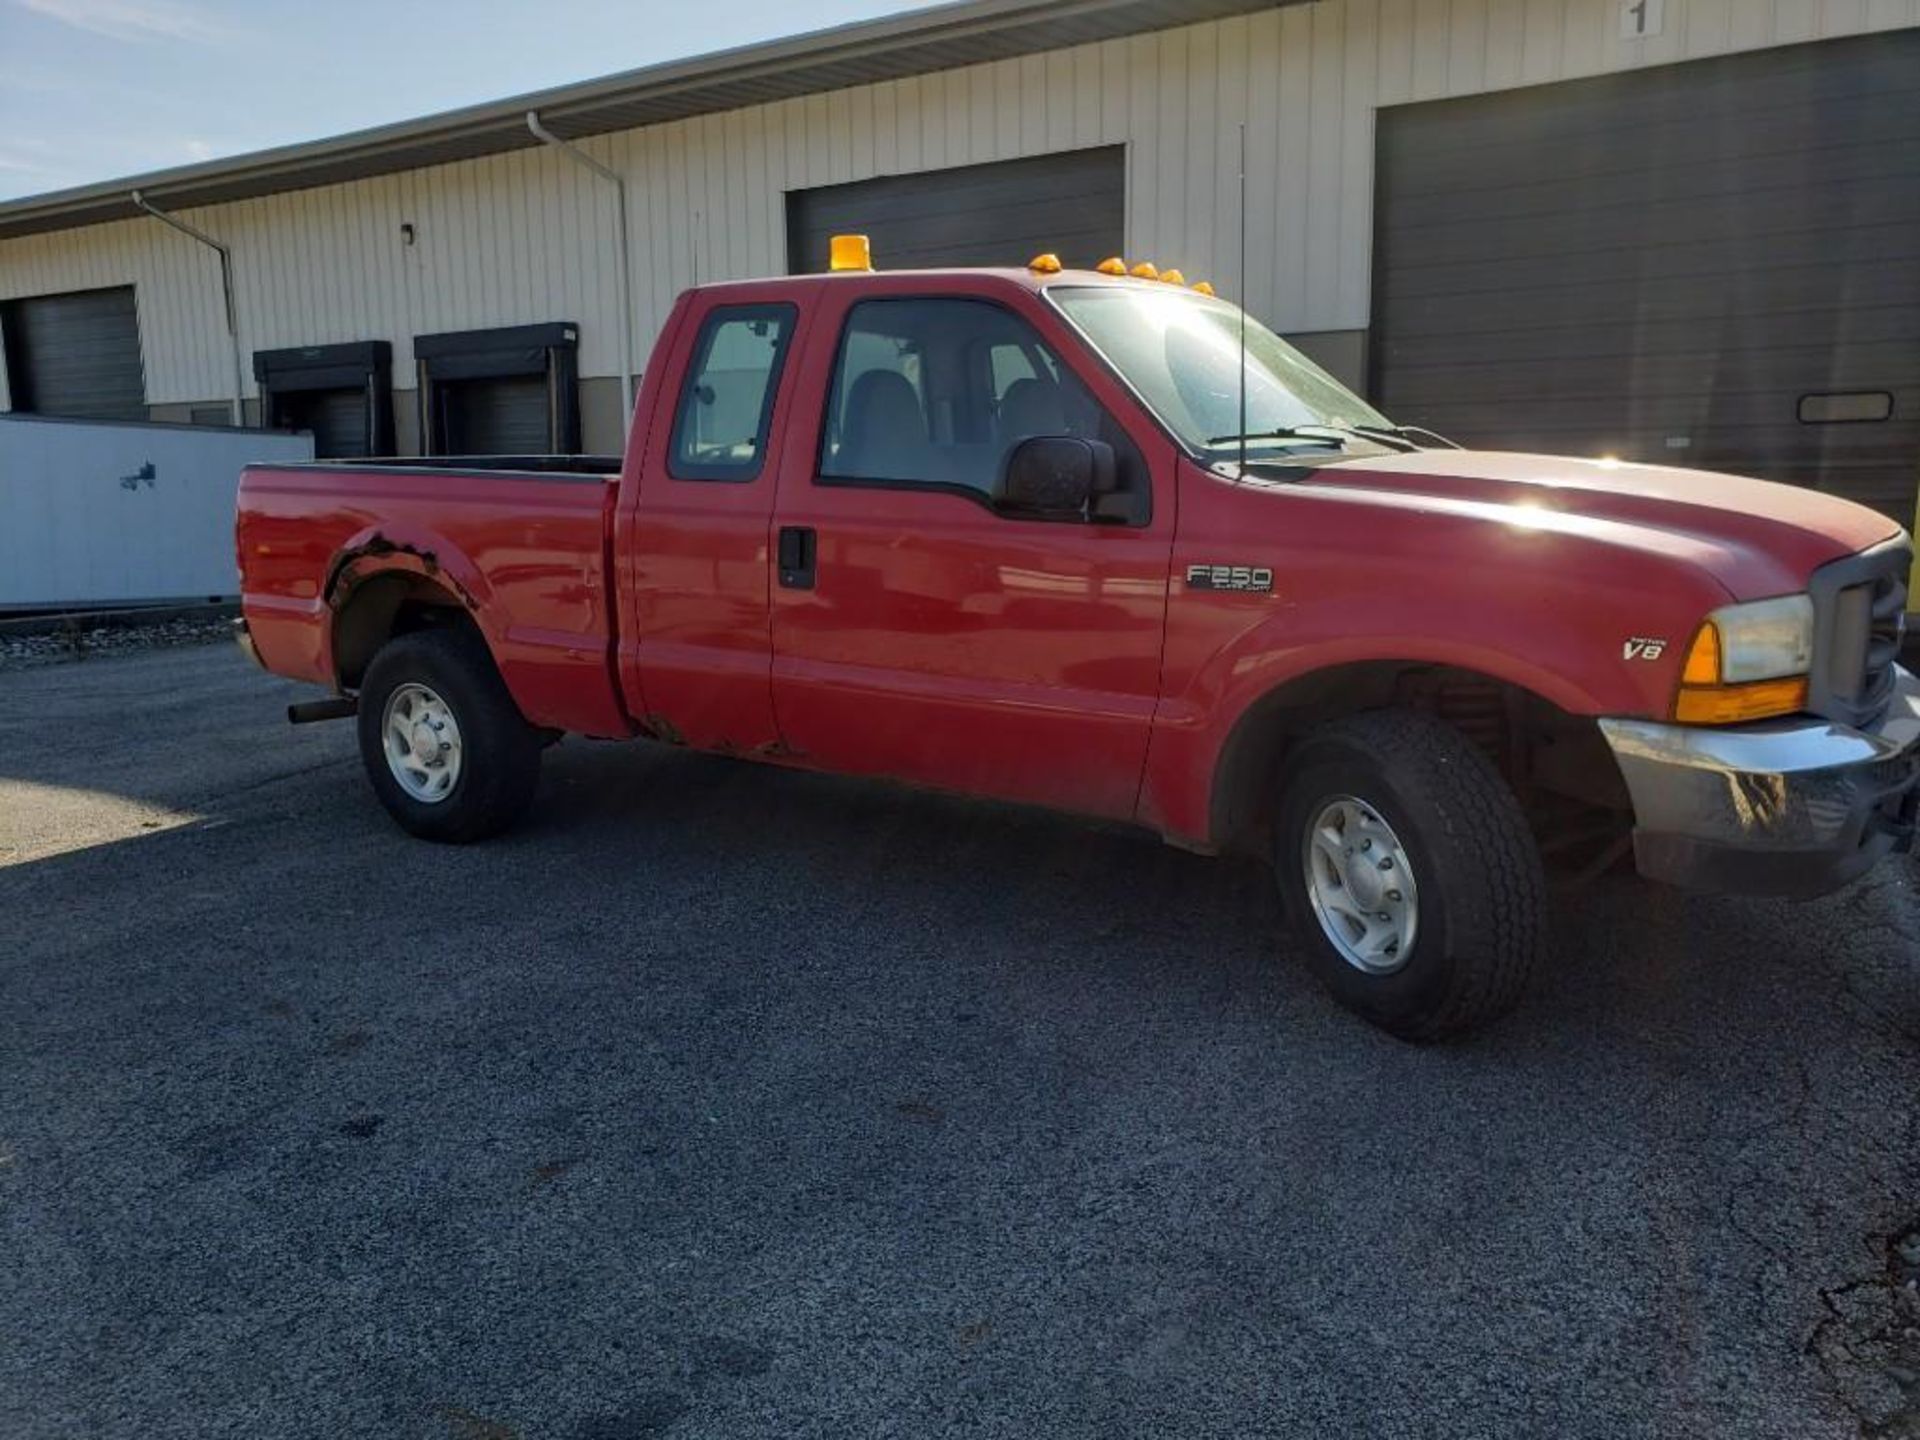 2000 Ford F250. VIN 1FTNX20L9YED73480. 5.4L V8. 2wd. 90,883 miles showing on odometer. - Image 10 of 27